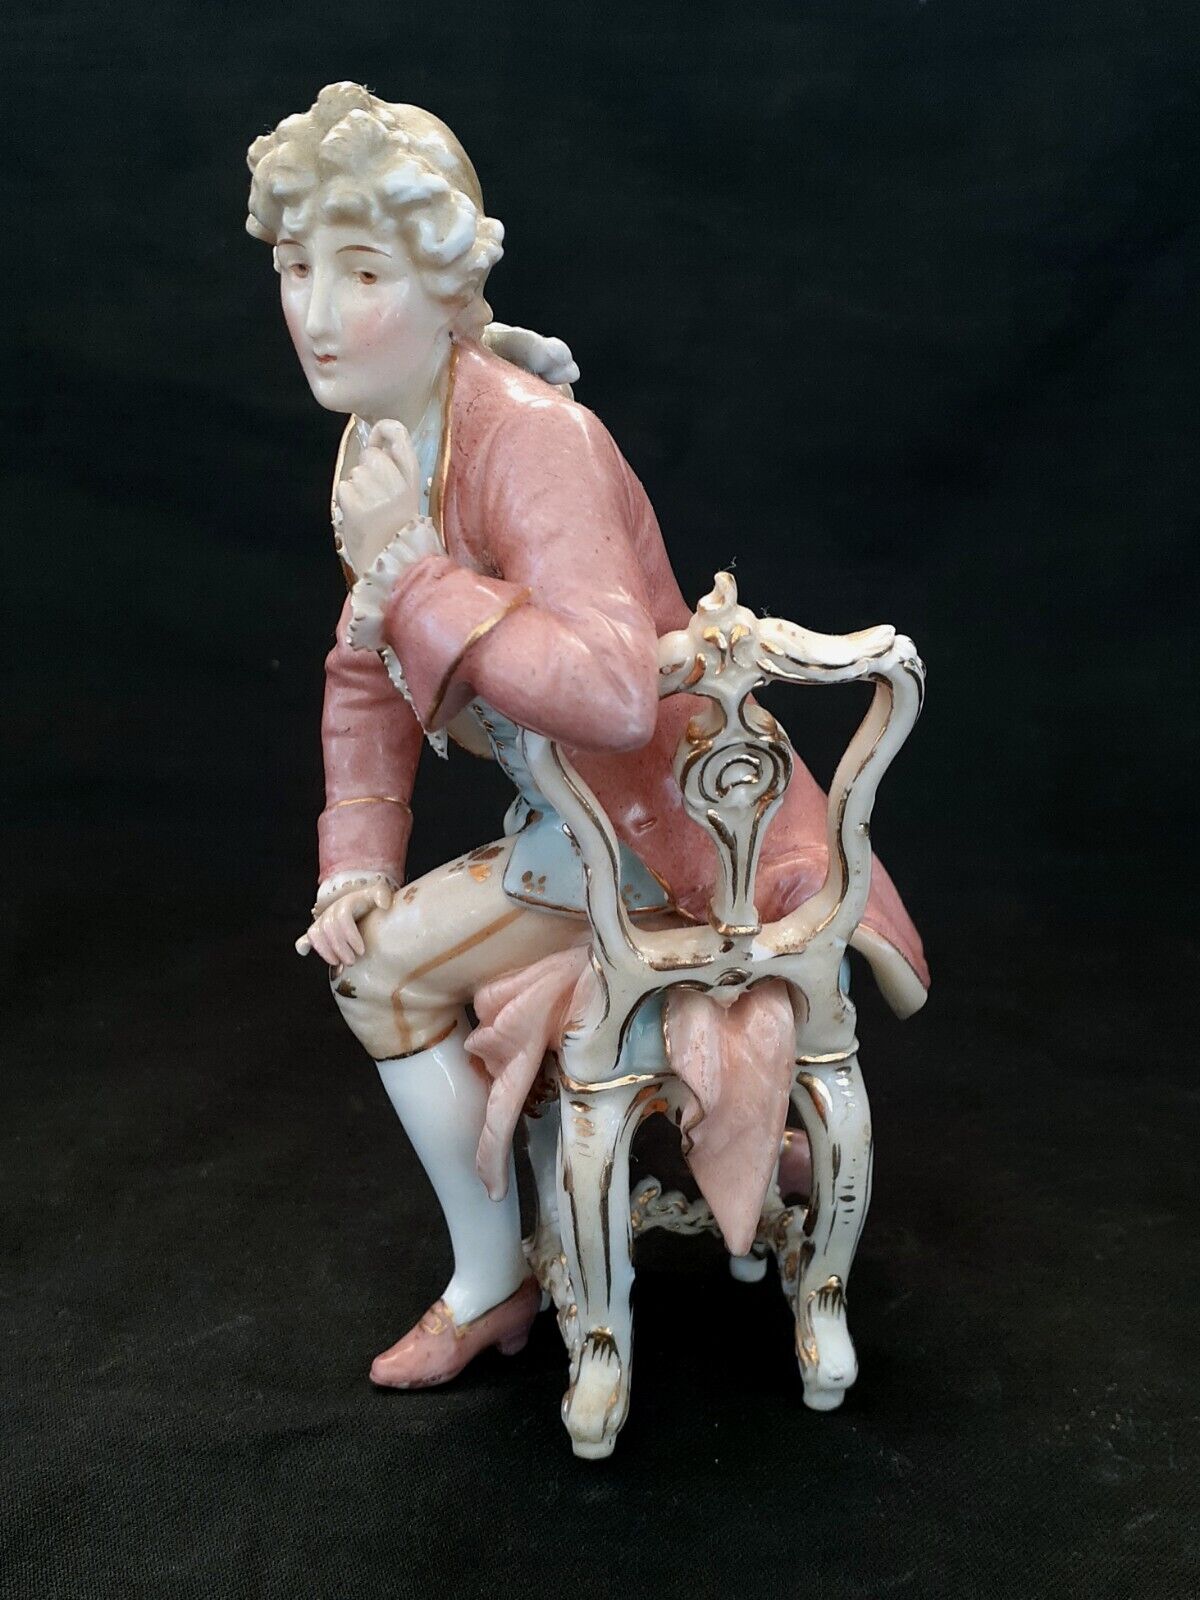 Antique Samson French Porcelain Figurine, 5.5 inches